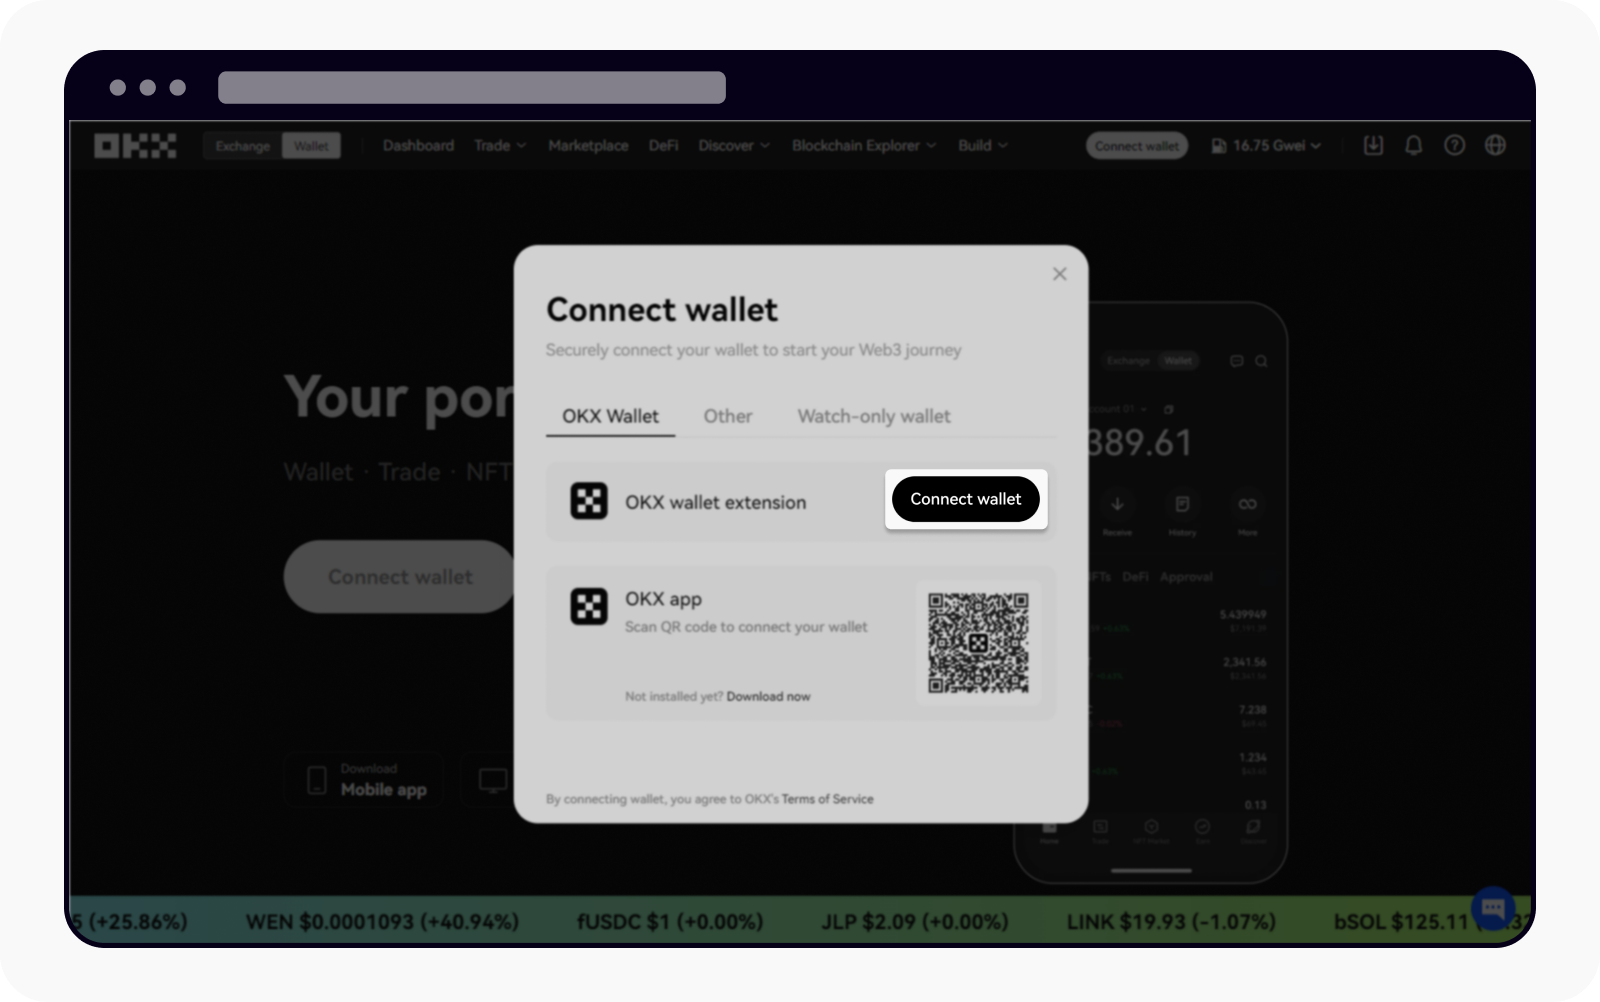 CT-web-web3-open Connect wallet page